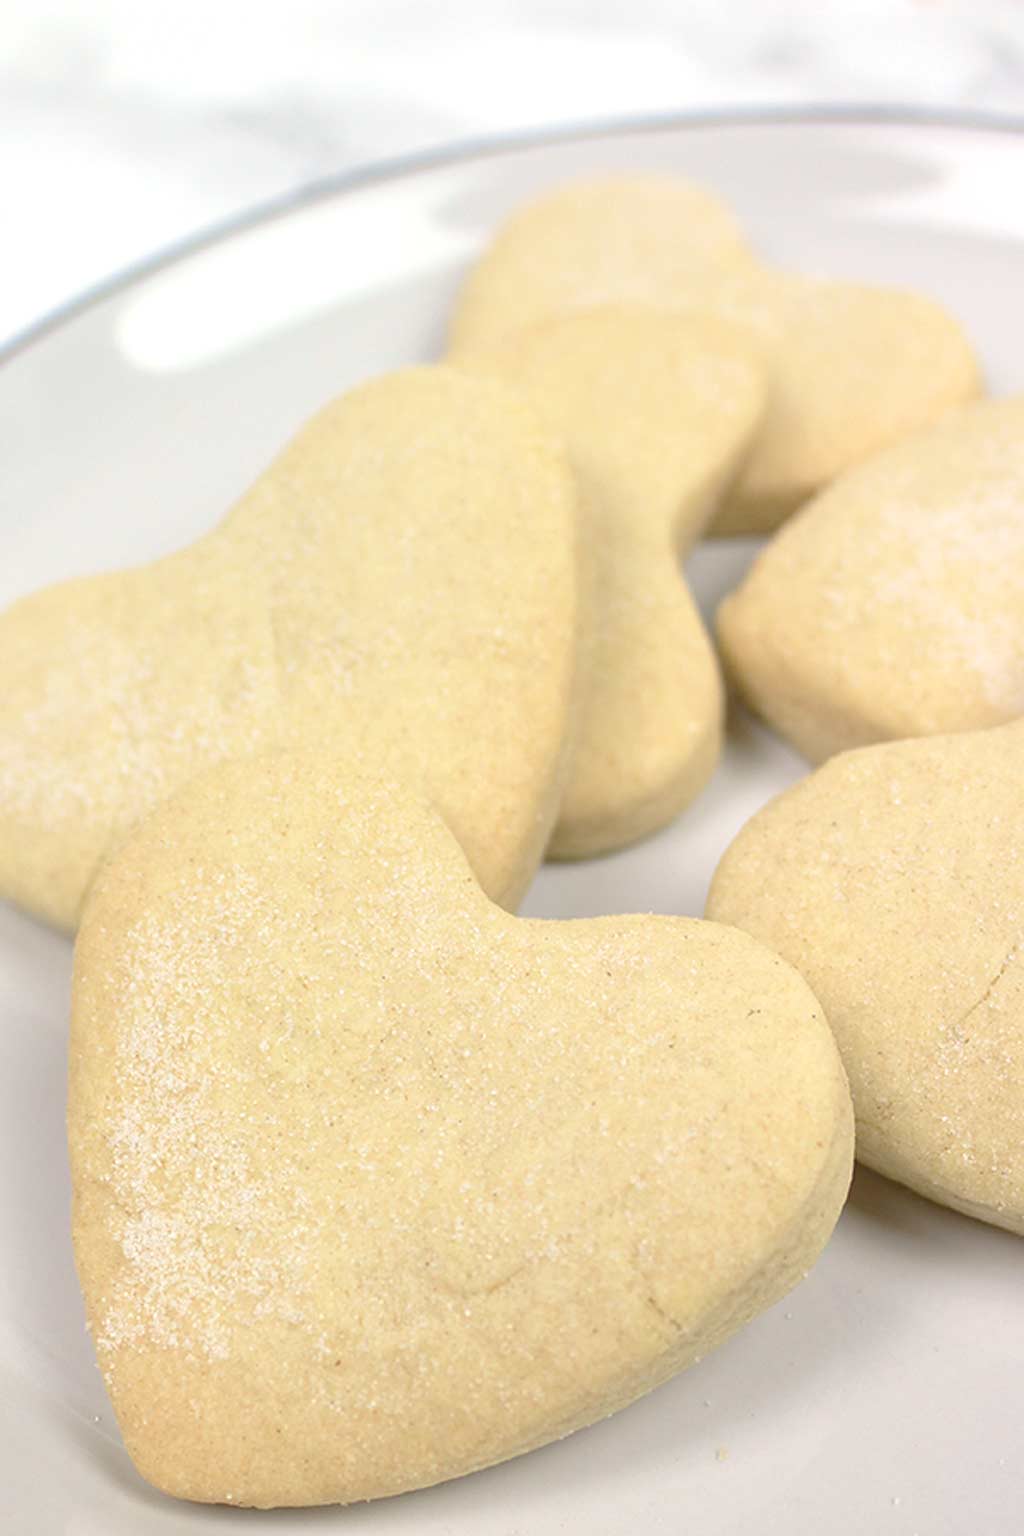 Heart shaped Shortbread image for vegan cookie recipes post